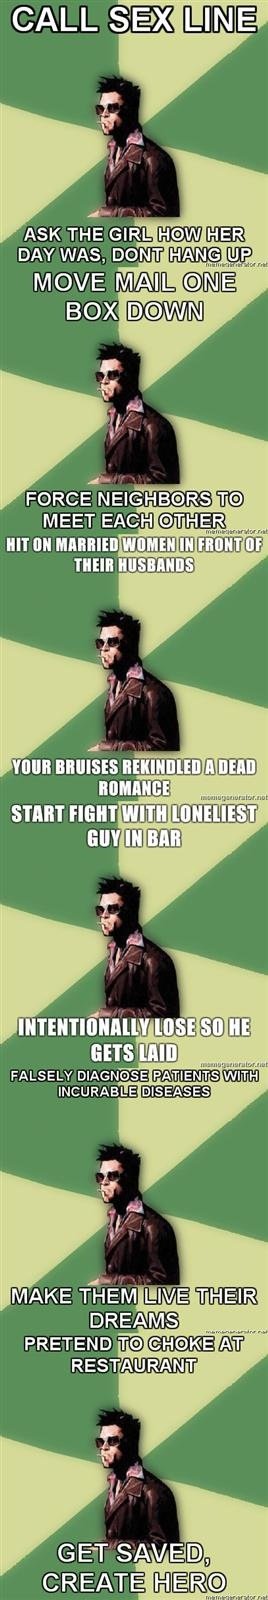 Tyler Durden Comp. first rule of fight club is.. same as /b/'s.. Hey RePoster: http://funnyjunk.com/funny_pictures/1847516/Helpful+Tyler+Durden/ This was submitted less than a day ago.